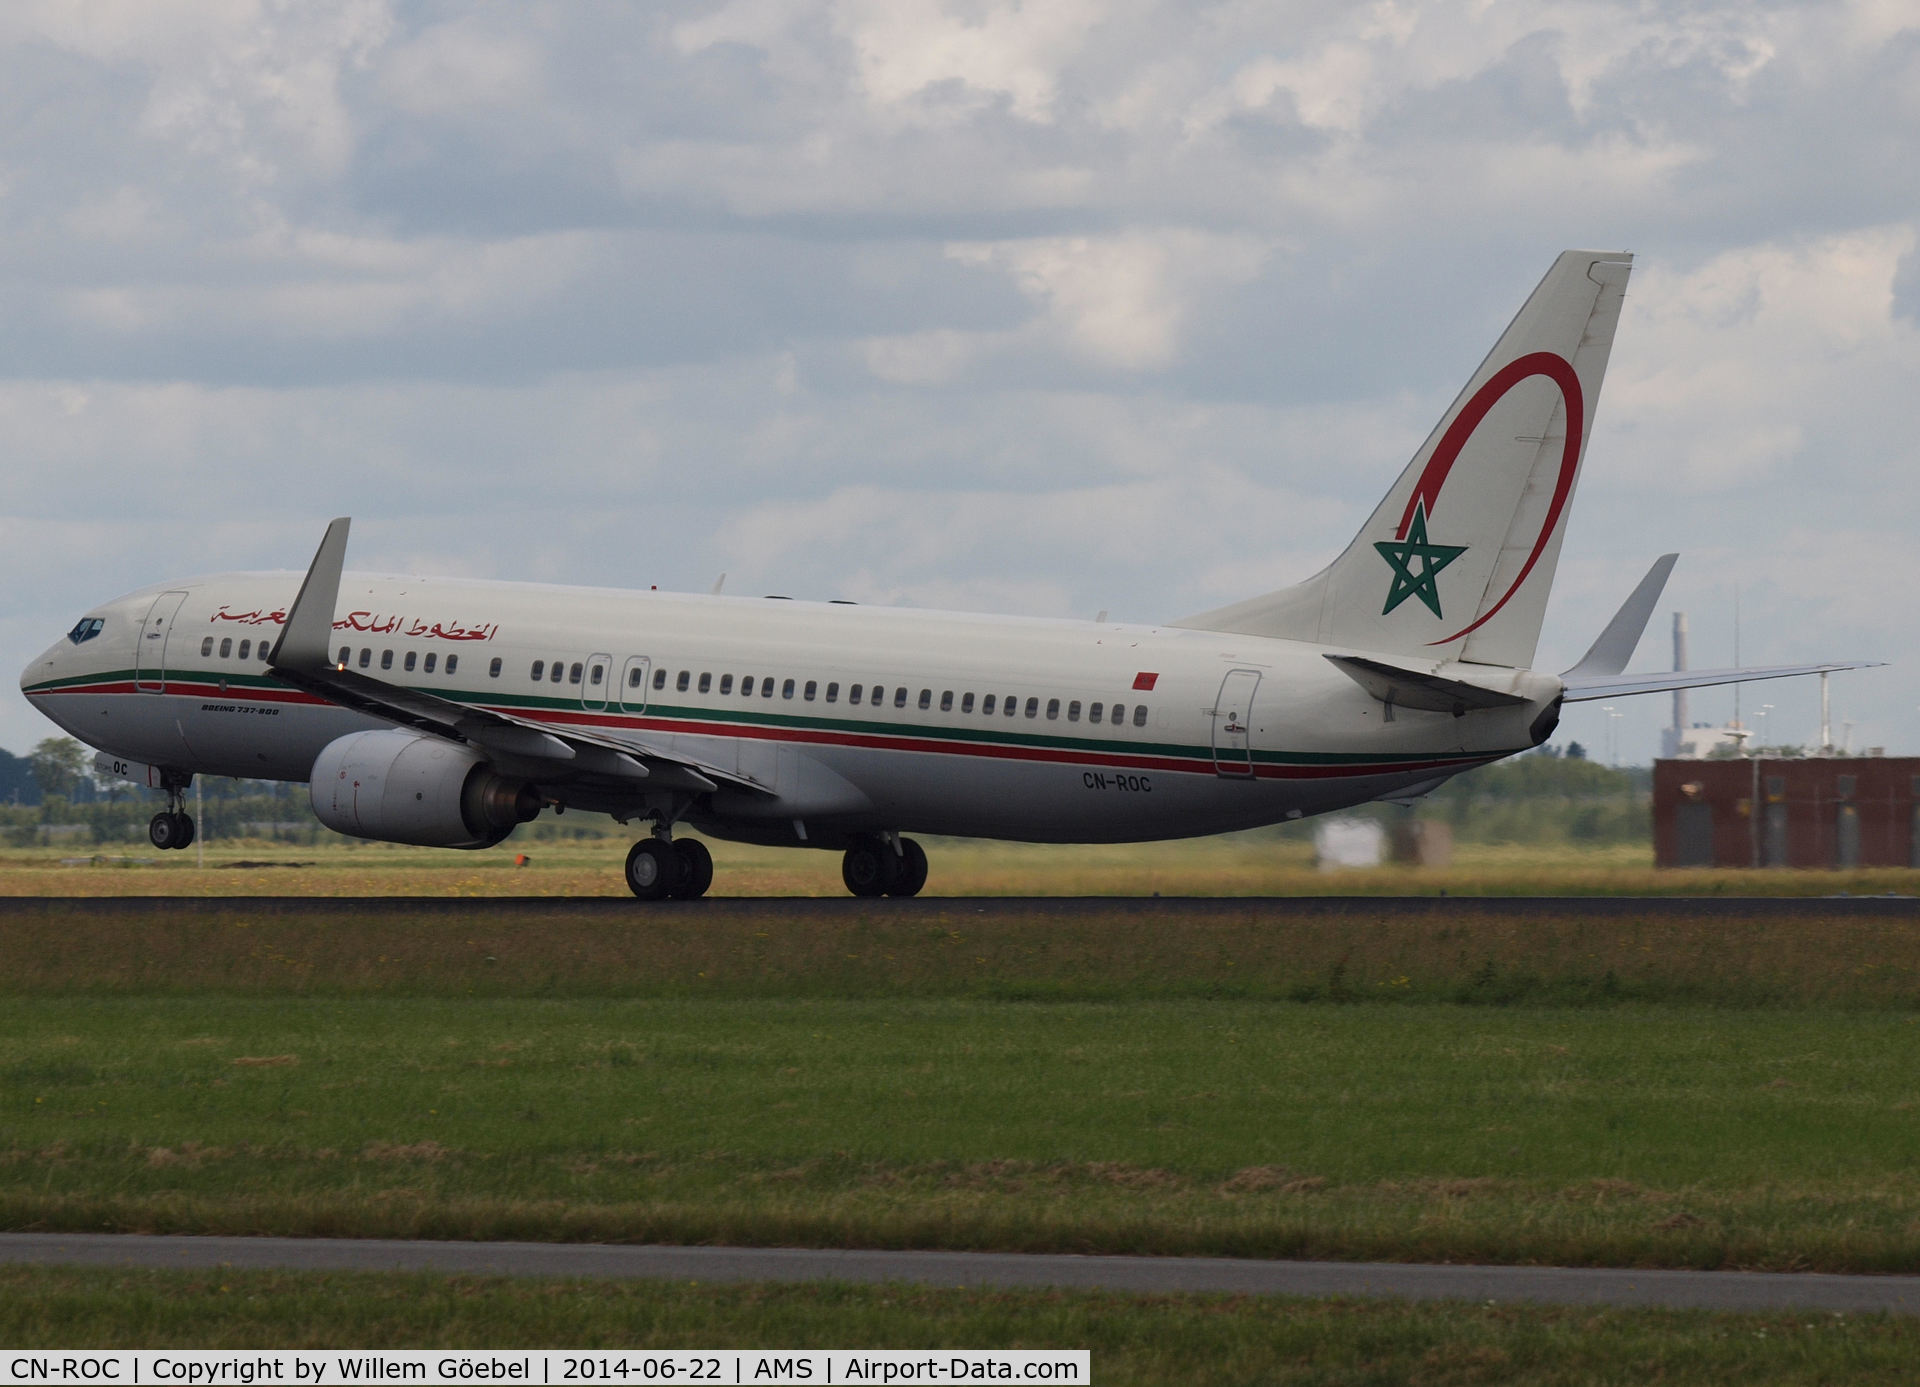 CN-ROC, 2005 Boeing 737-8B6 C/N 33061, Take off from runway 36L of Schiphol Airport